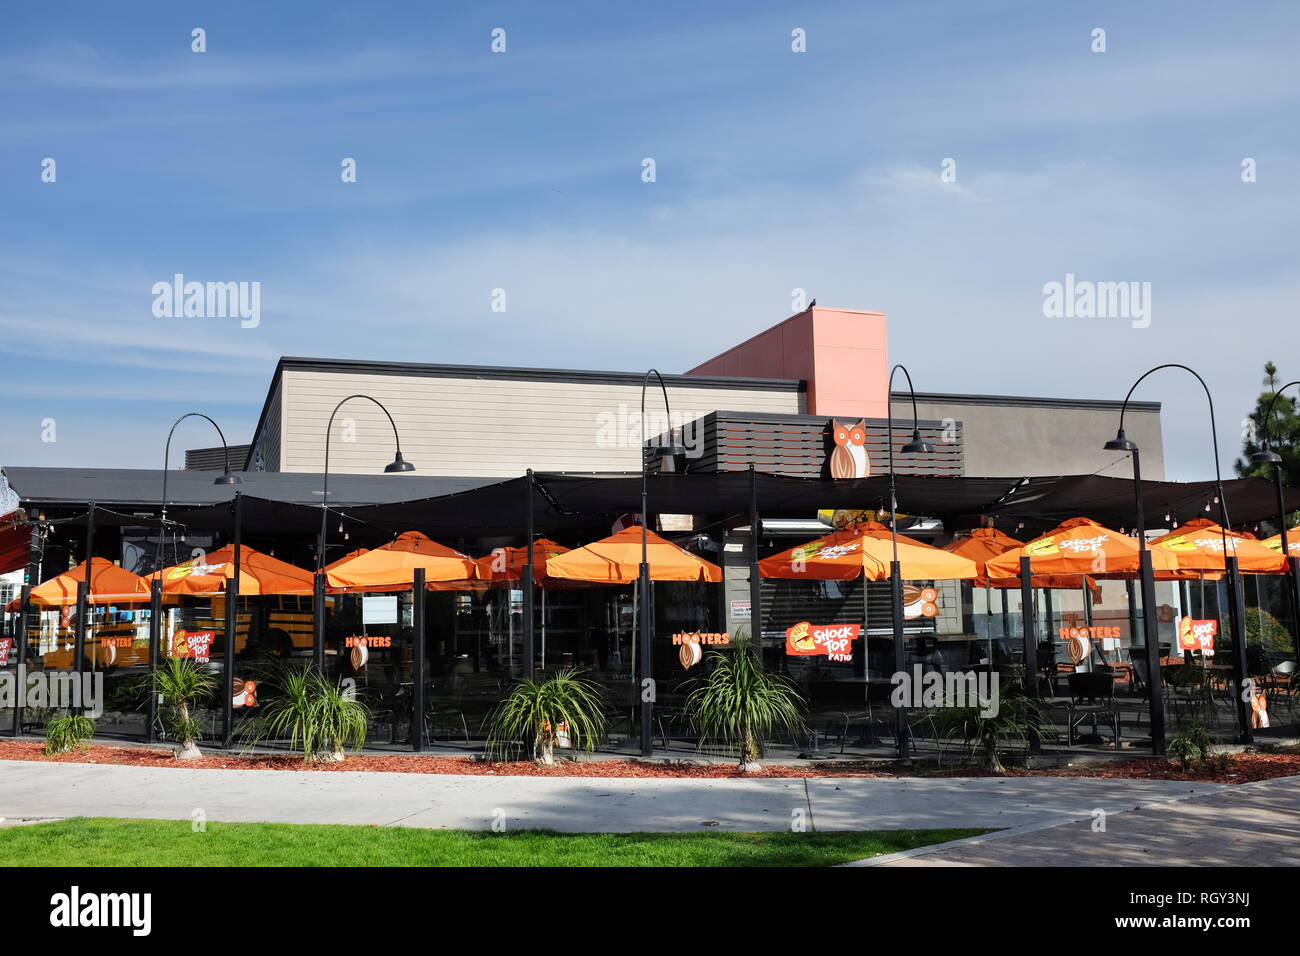 LONG BEACH, CALIFORNIA - JAN 30, 2019: Hooters Restaurant in Shoreline Village near the Convention Center and Aquarium of the Pacific. Stock Photo